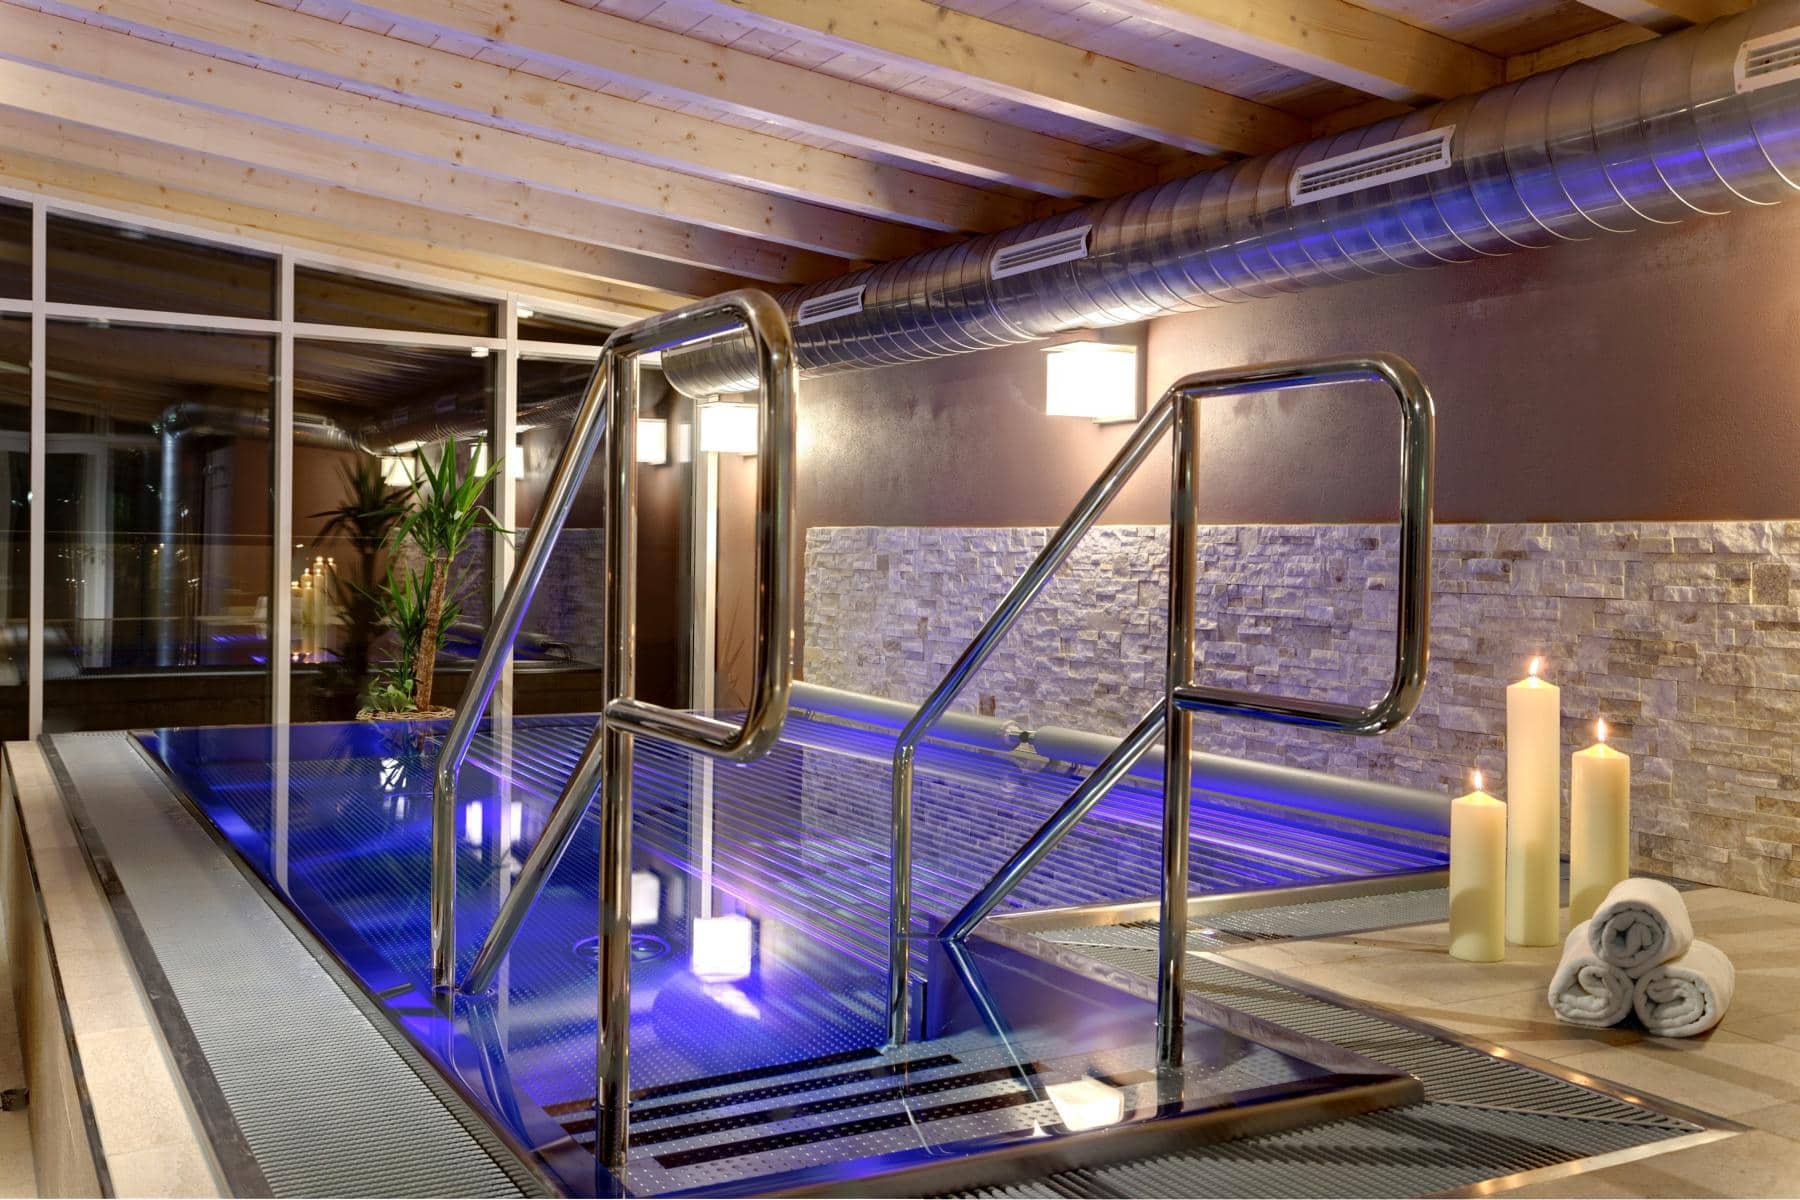 Indoor Hotel Swimming Bath Pool Refurbishment Commercial UK Stainless Steel Lap Competitive Swimming Pools UK Competitive Swimmer Design Installation Company Luxury Bespoke Infinity Indoor Outdoor Engineered Made to Measure Level Deck Skimmer Private Whirlpool One Piece Steam Sauna Rooms